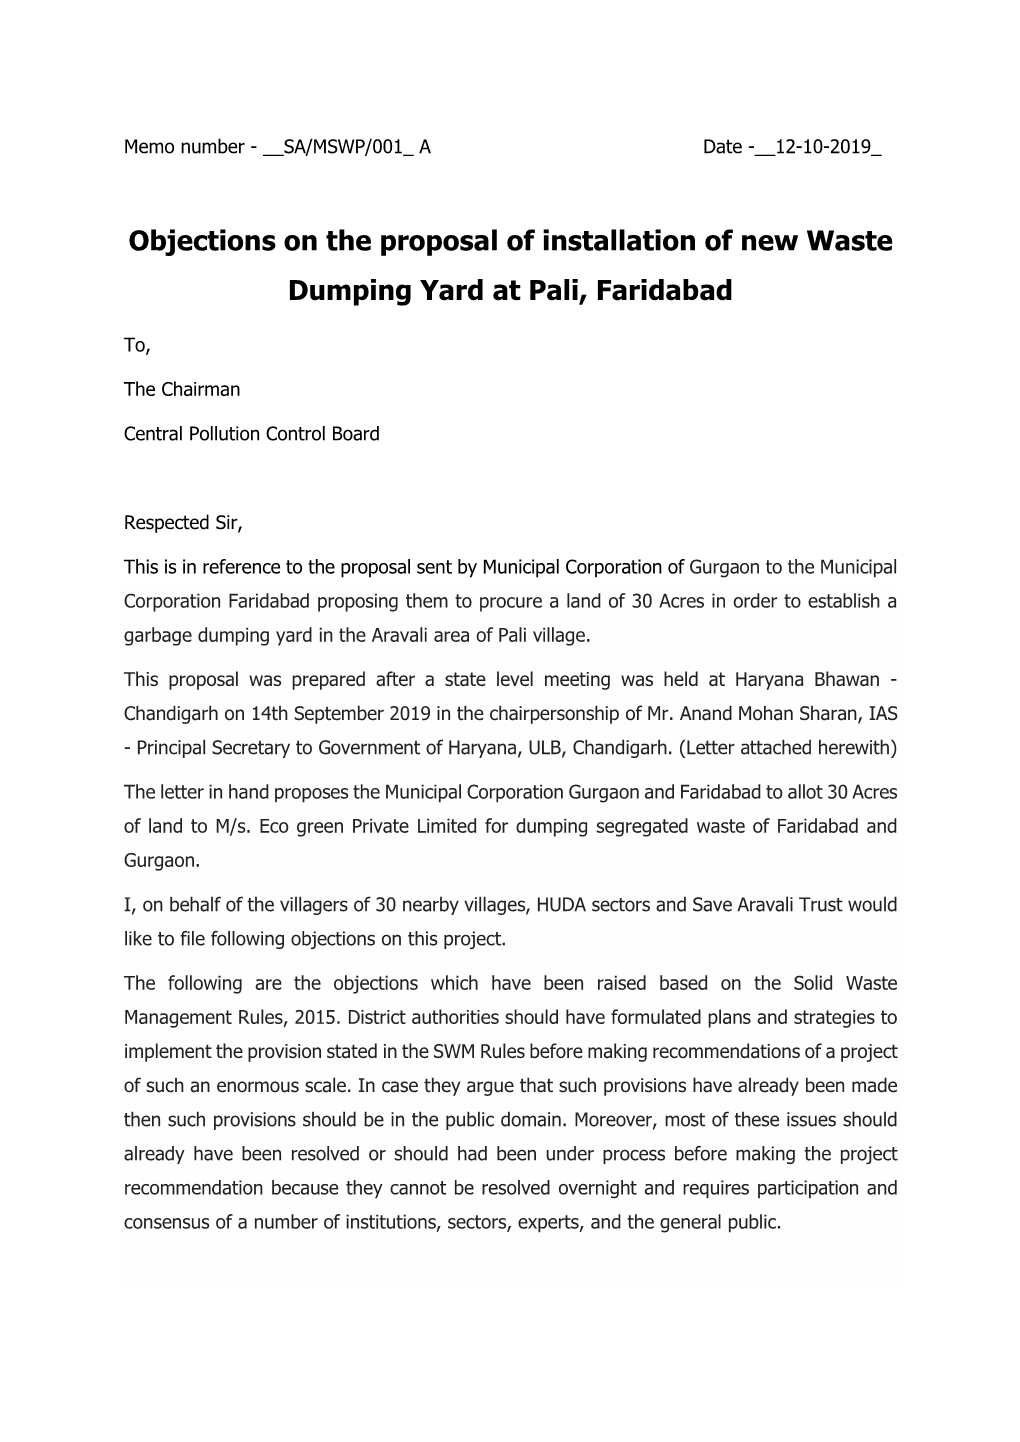 Objections on the Proposal of Installation of New Waste Dumping